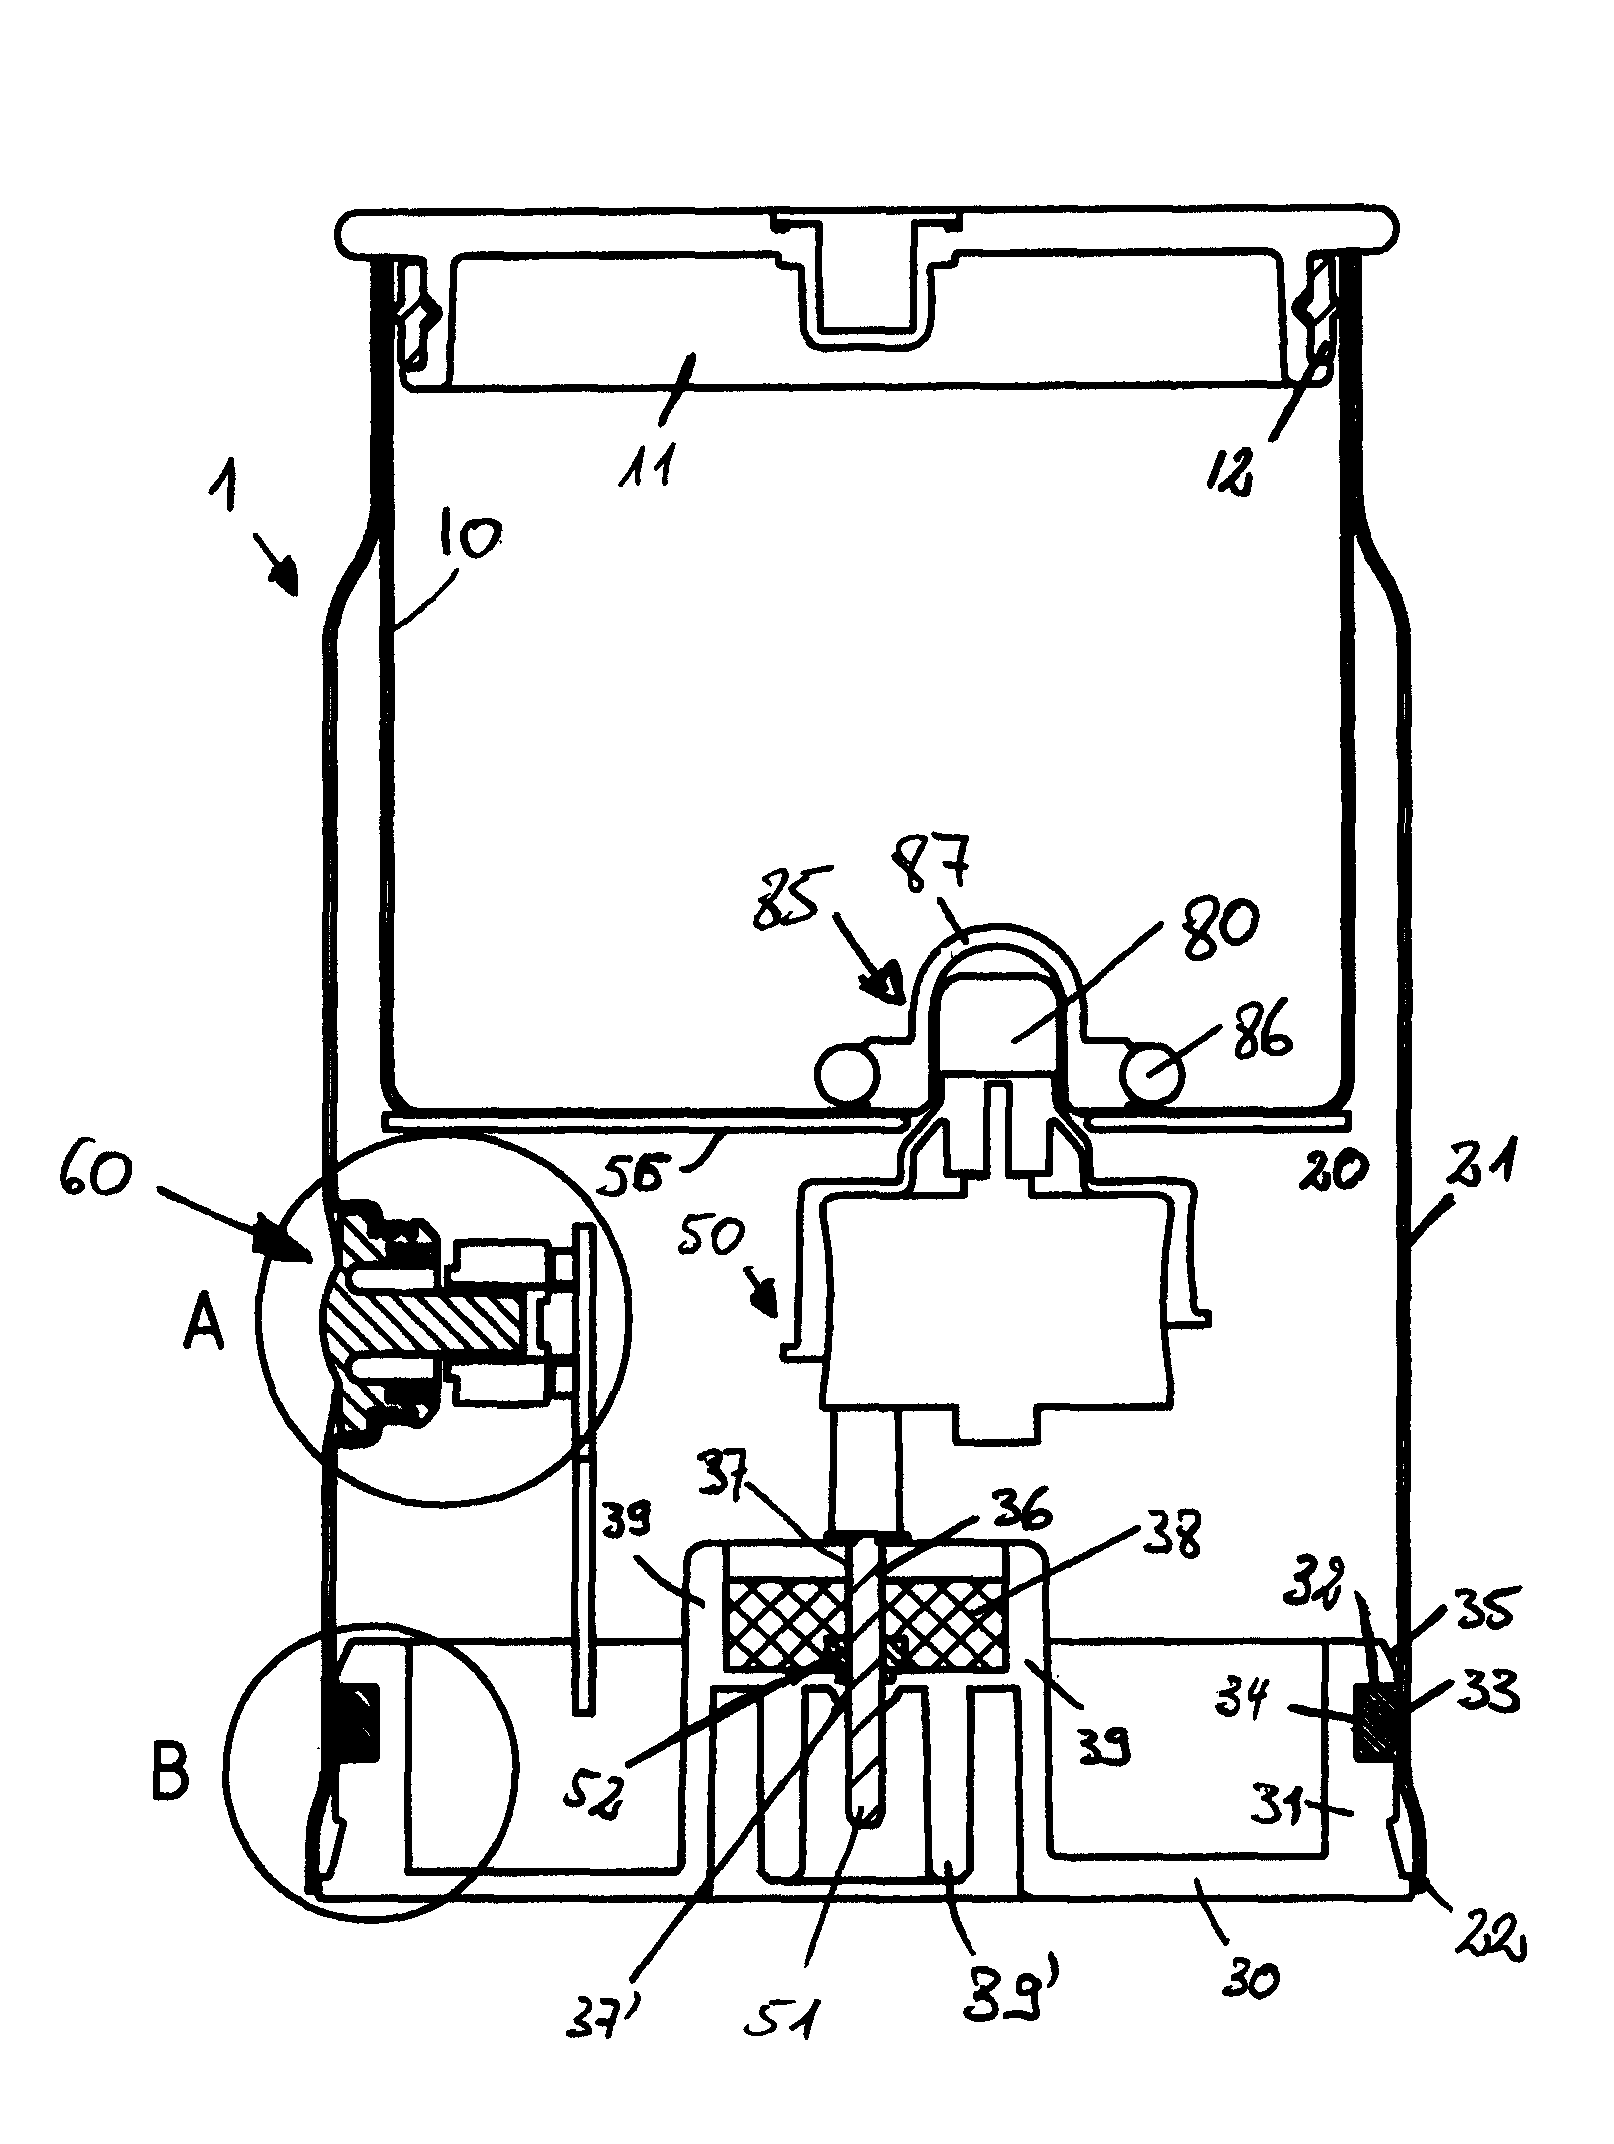 Appliance for conditioning a milk-based liquid